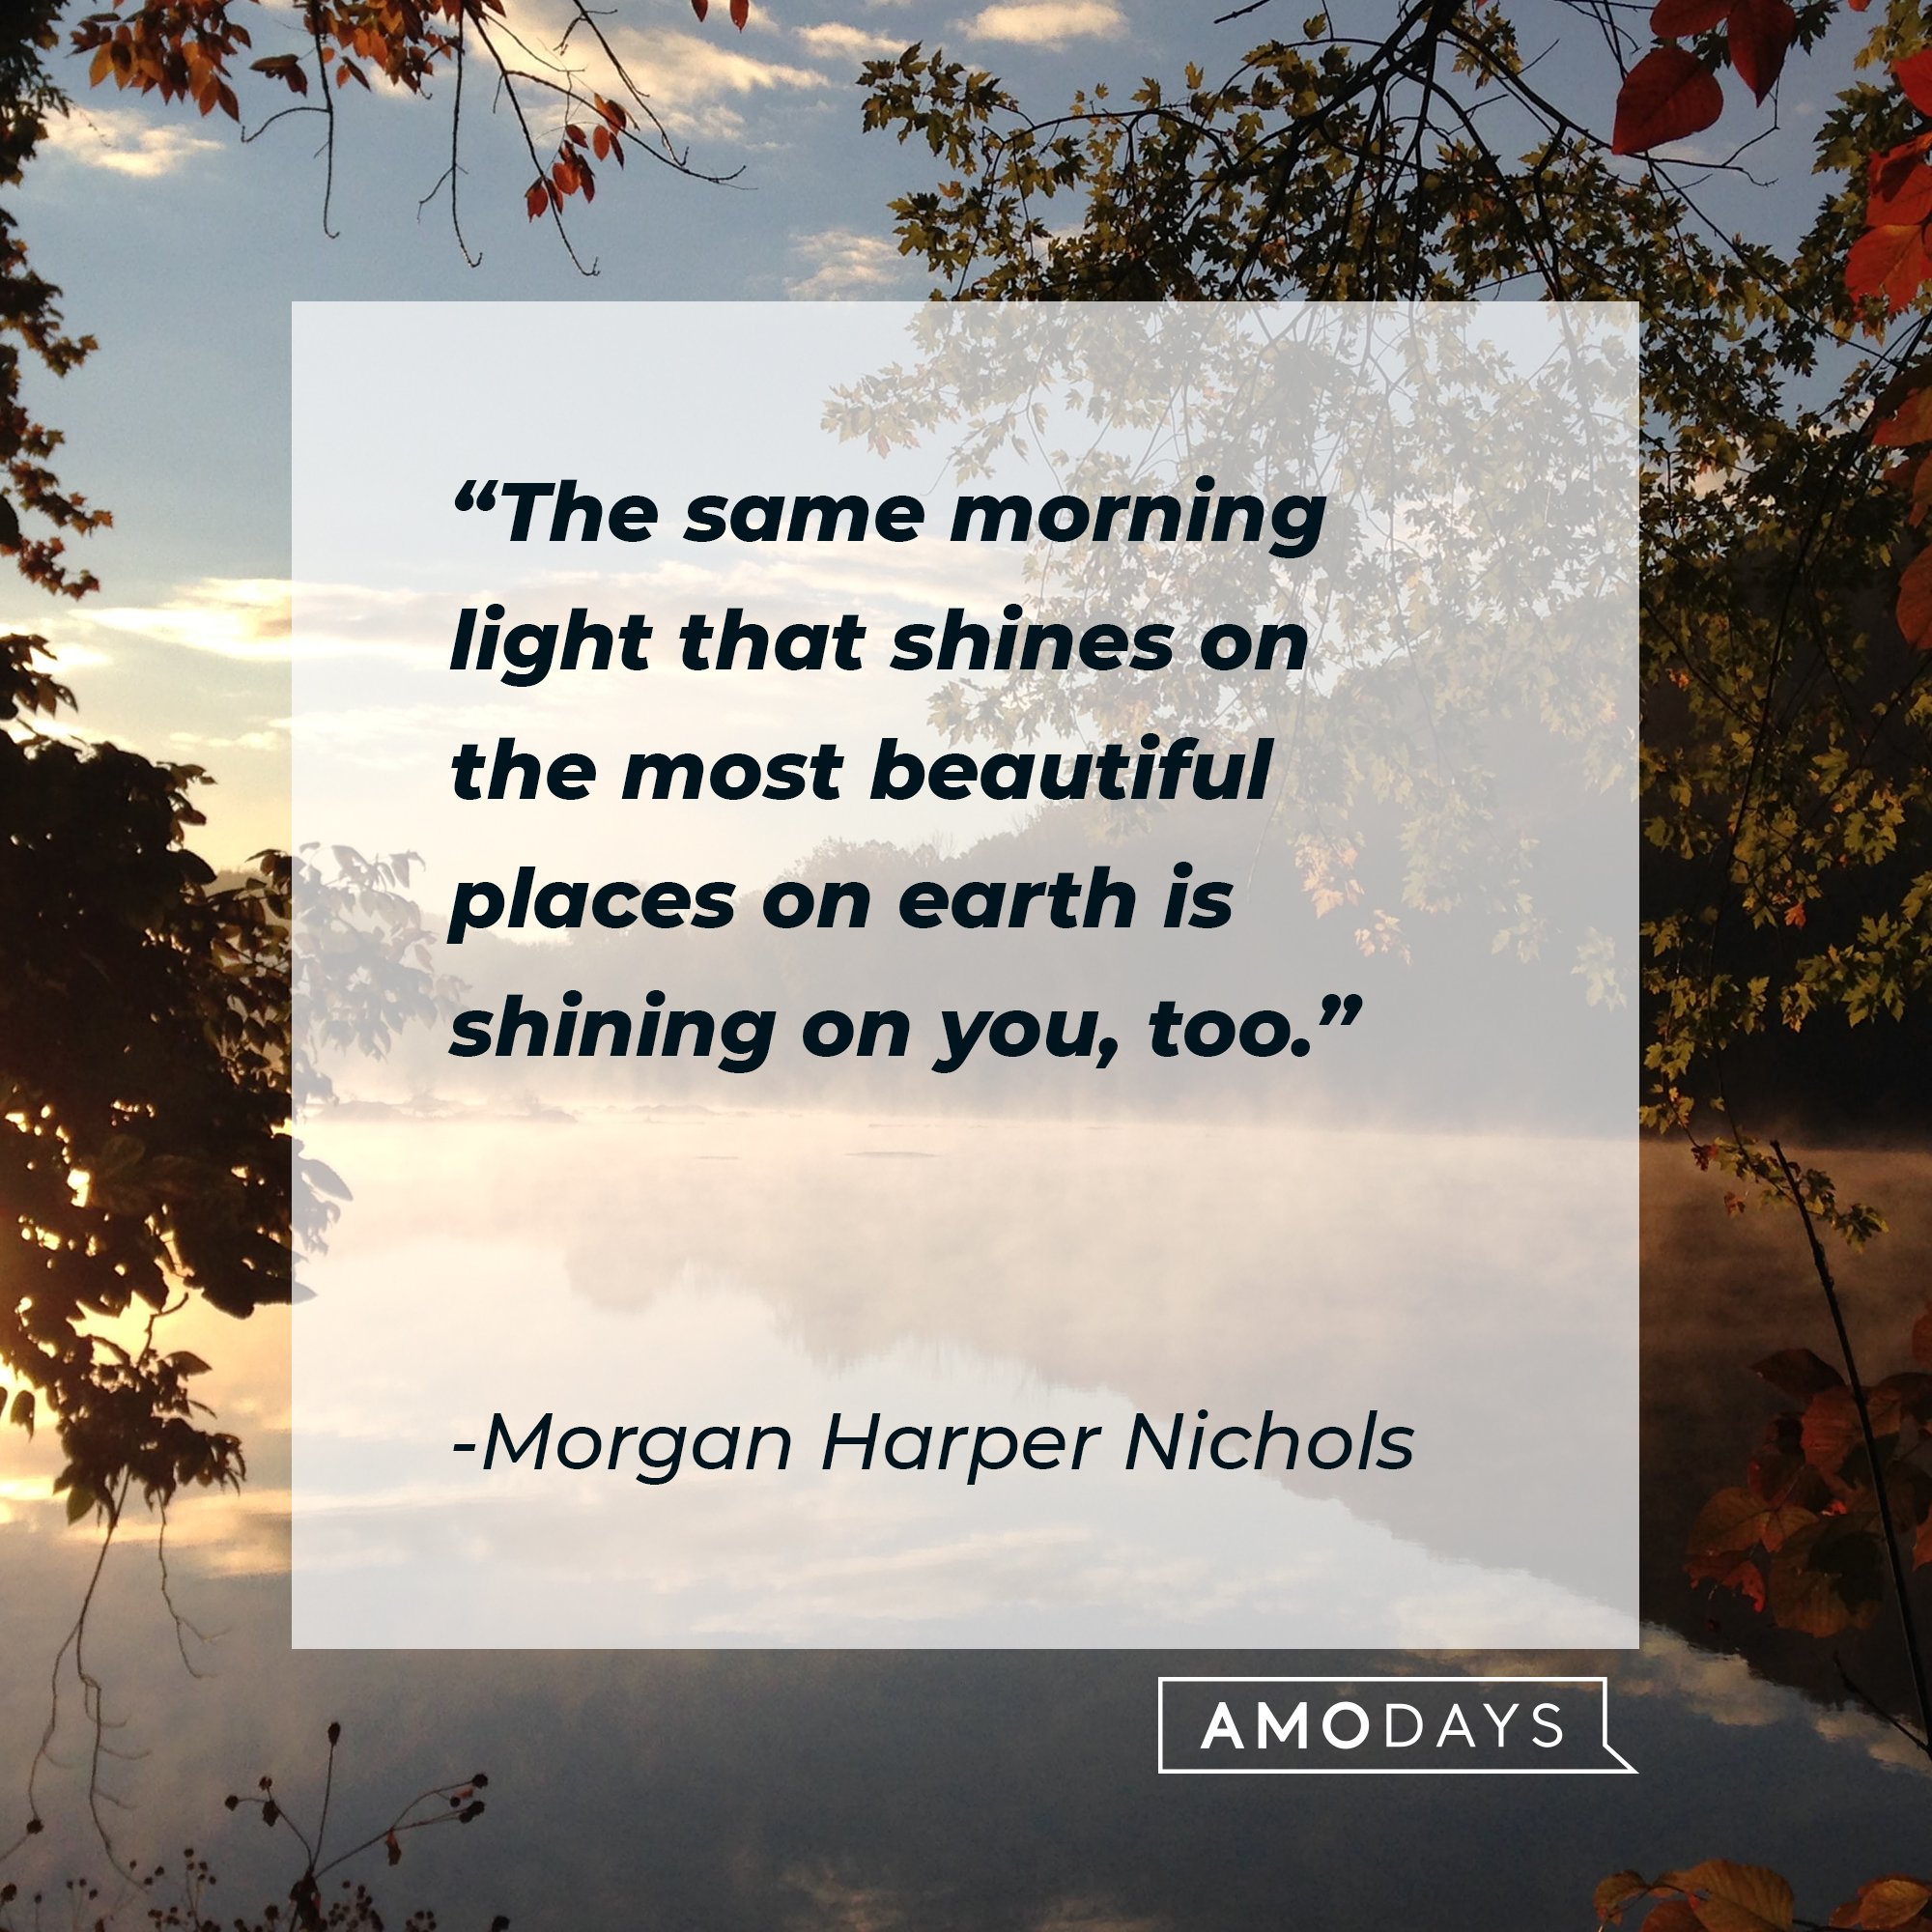 Morgan Harper Nichols’ quote: "The same morning light that shines on the most beautiful places on earth is shining on you, too." | Image: AmoDays